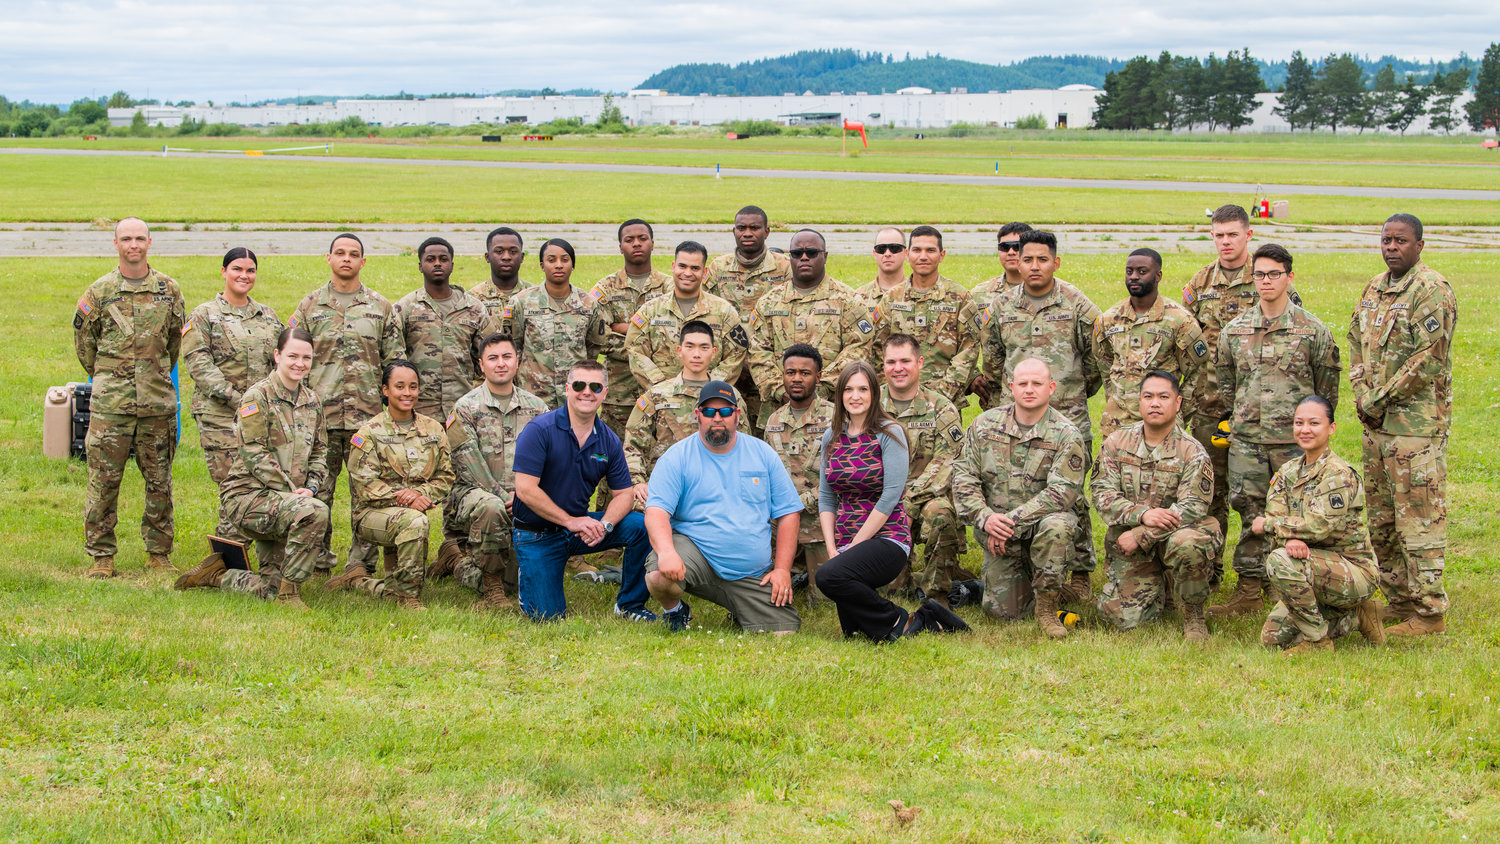 Staff from the Chehalis-Centralia Airport pose for a photo with members of the United States Army and Airforce from Joint Base Lewis-McChord during a military training exercise on Wednesday, June 22 in Chehalis.